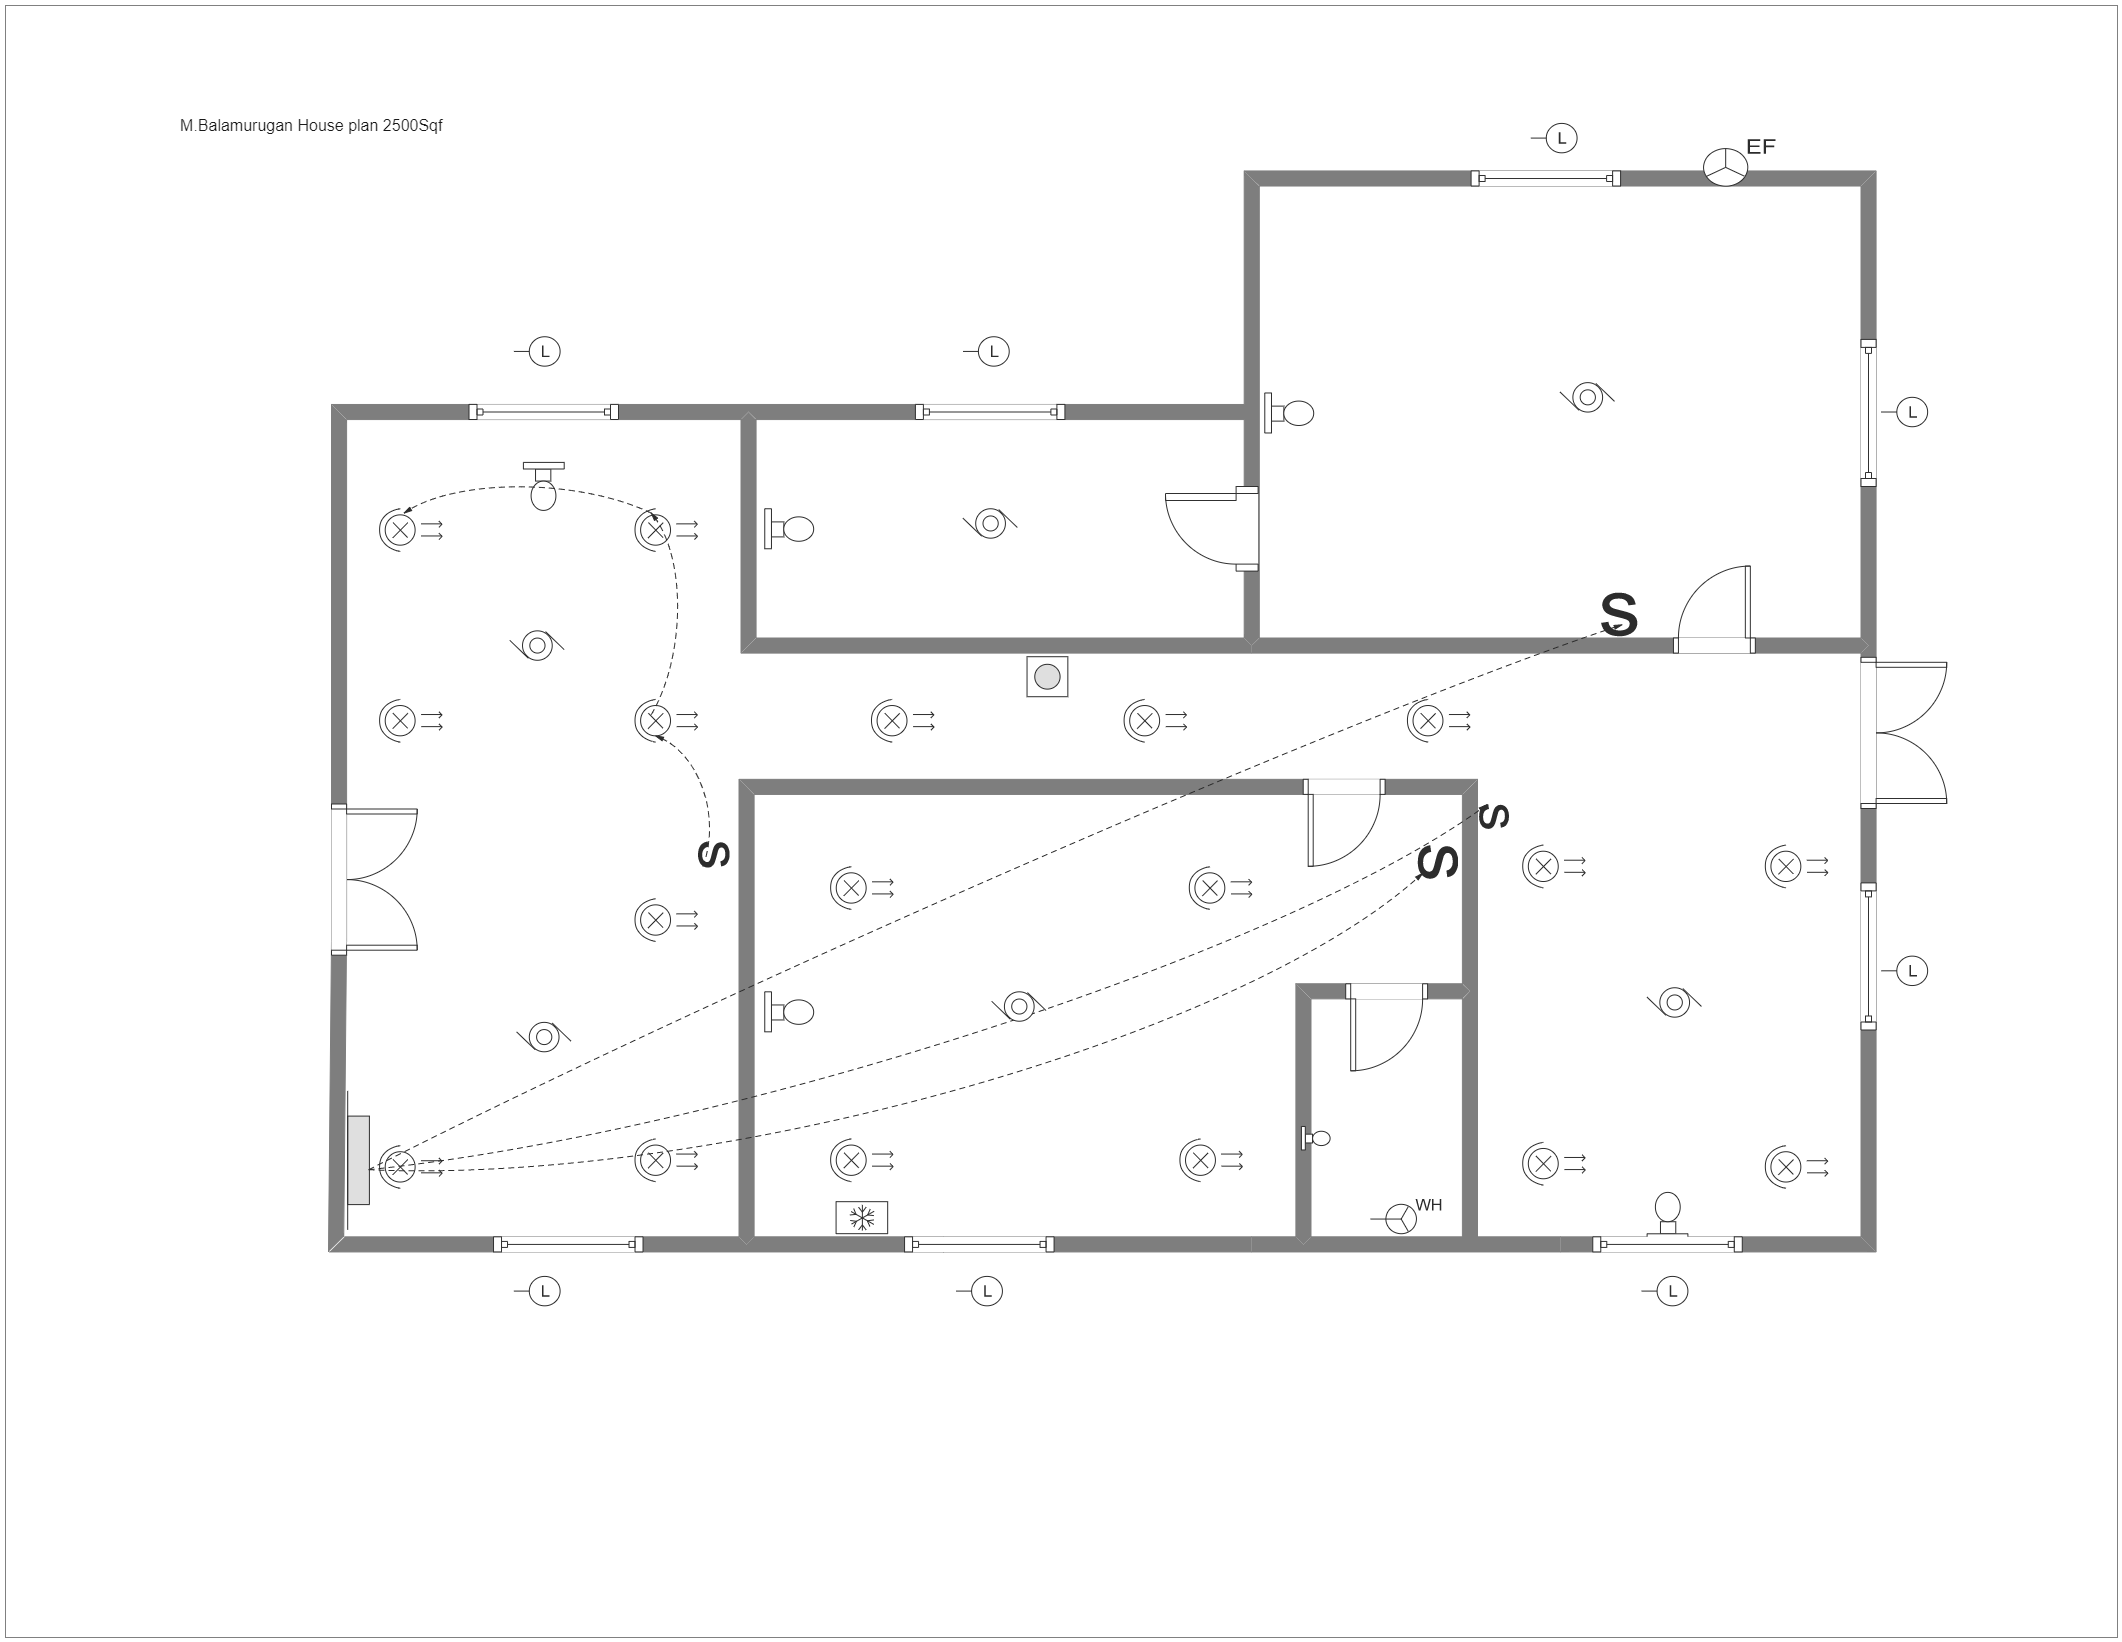 Home Ceiling Plan With Reflection